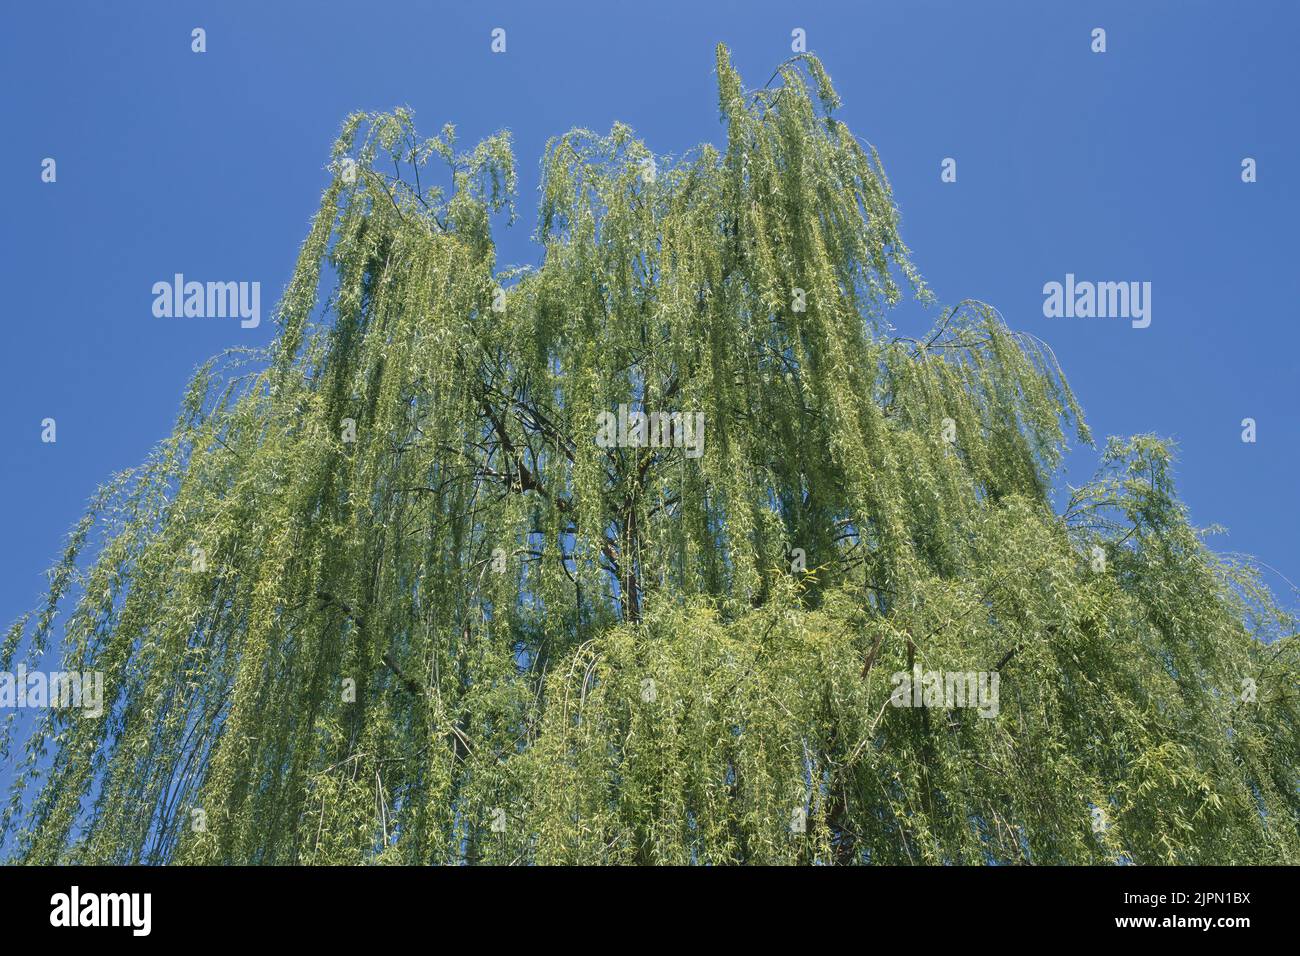 the foliage of a weeping willow seen from below, Salix babylonica, Salicaceae Stock Photo